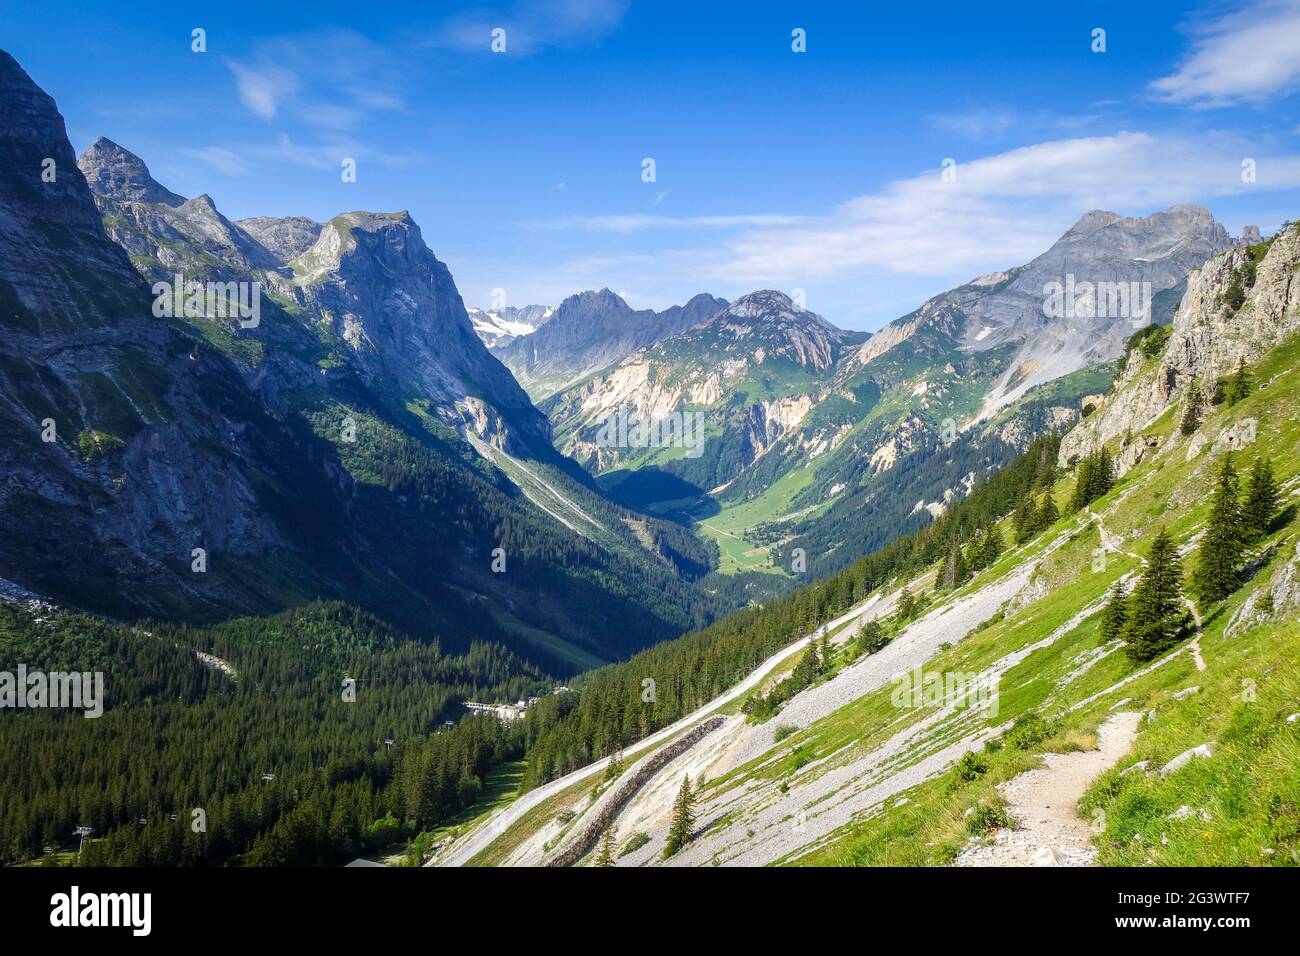 Mountain and hiking path landscape in French alps Stock Photo